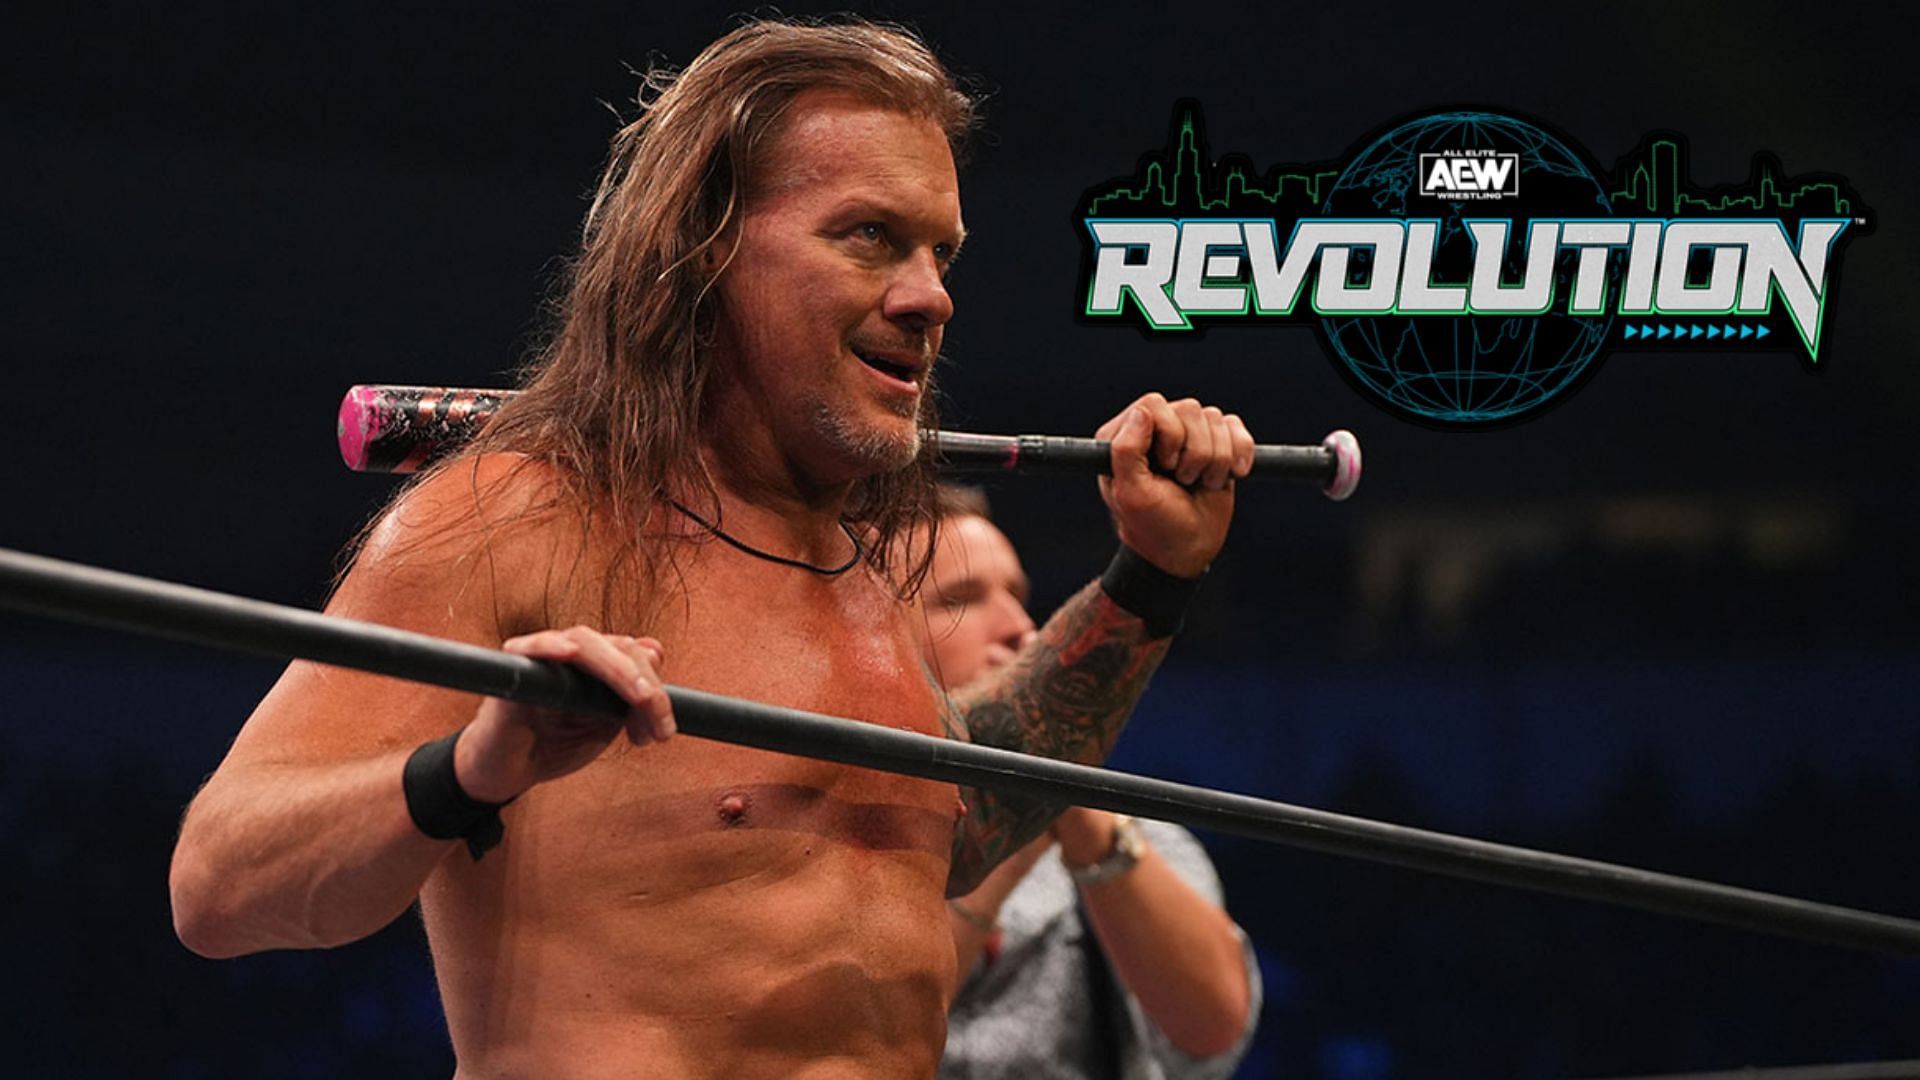 Chris Jericho will have a match at AEW Revolution!